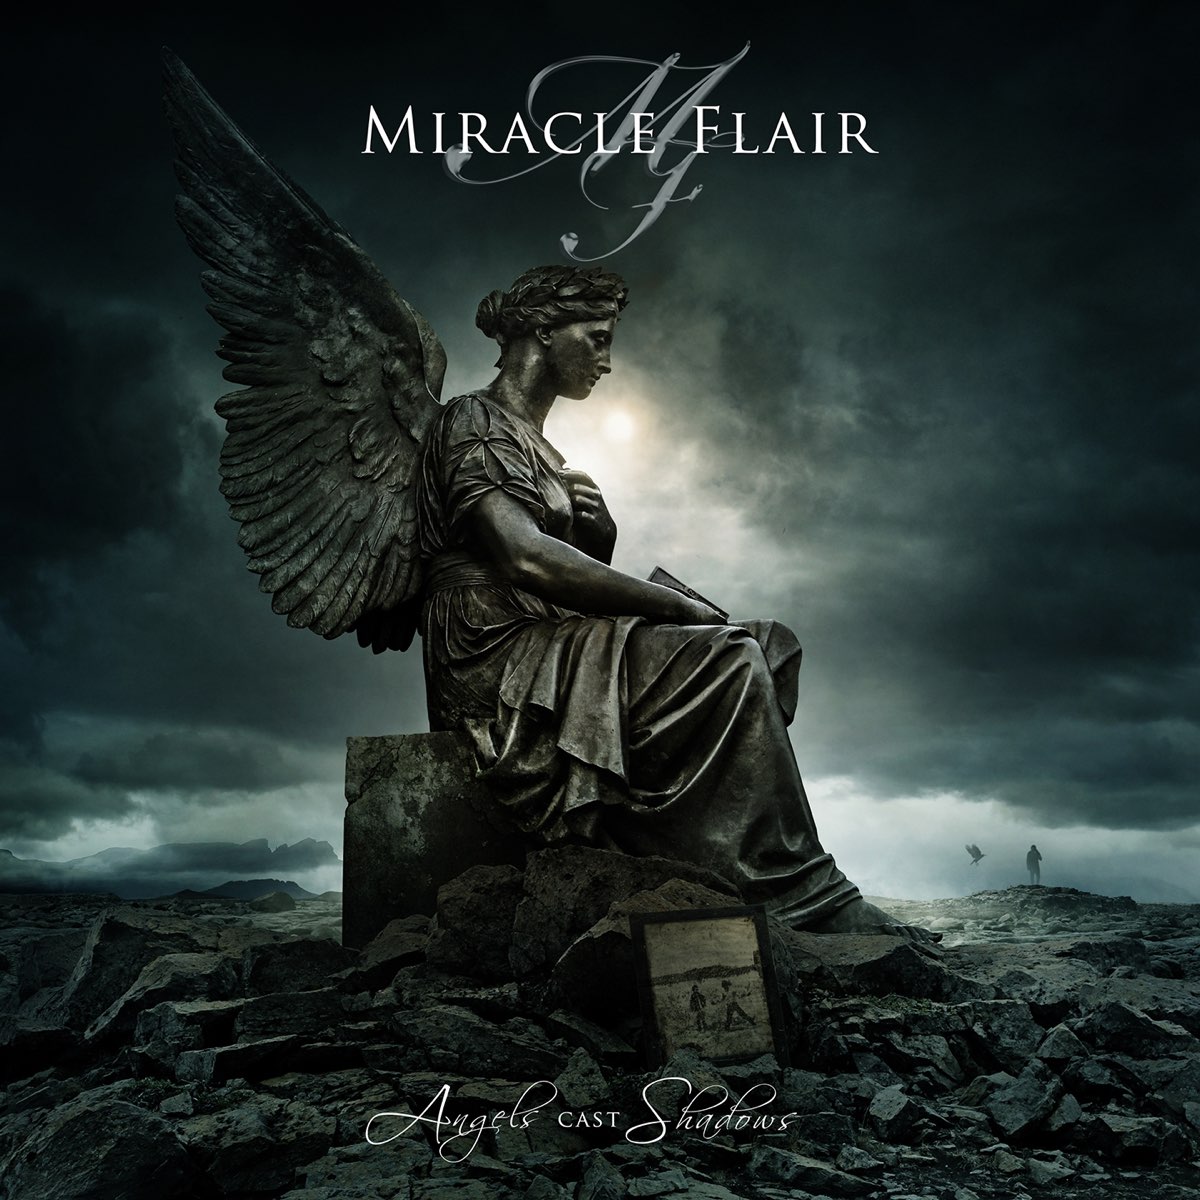 Angels Cast Shadows by Miracle Flair on Apple Music